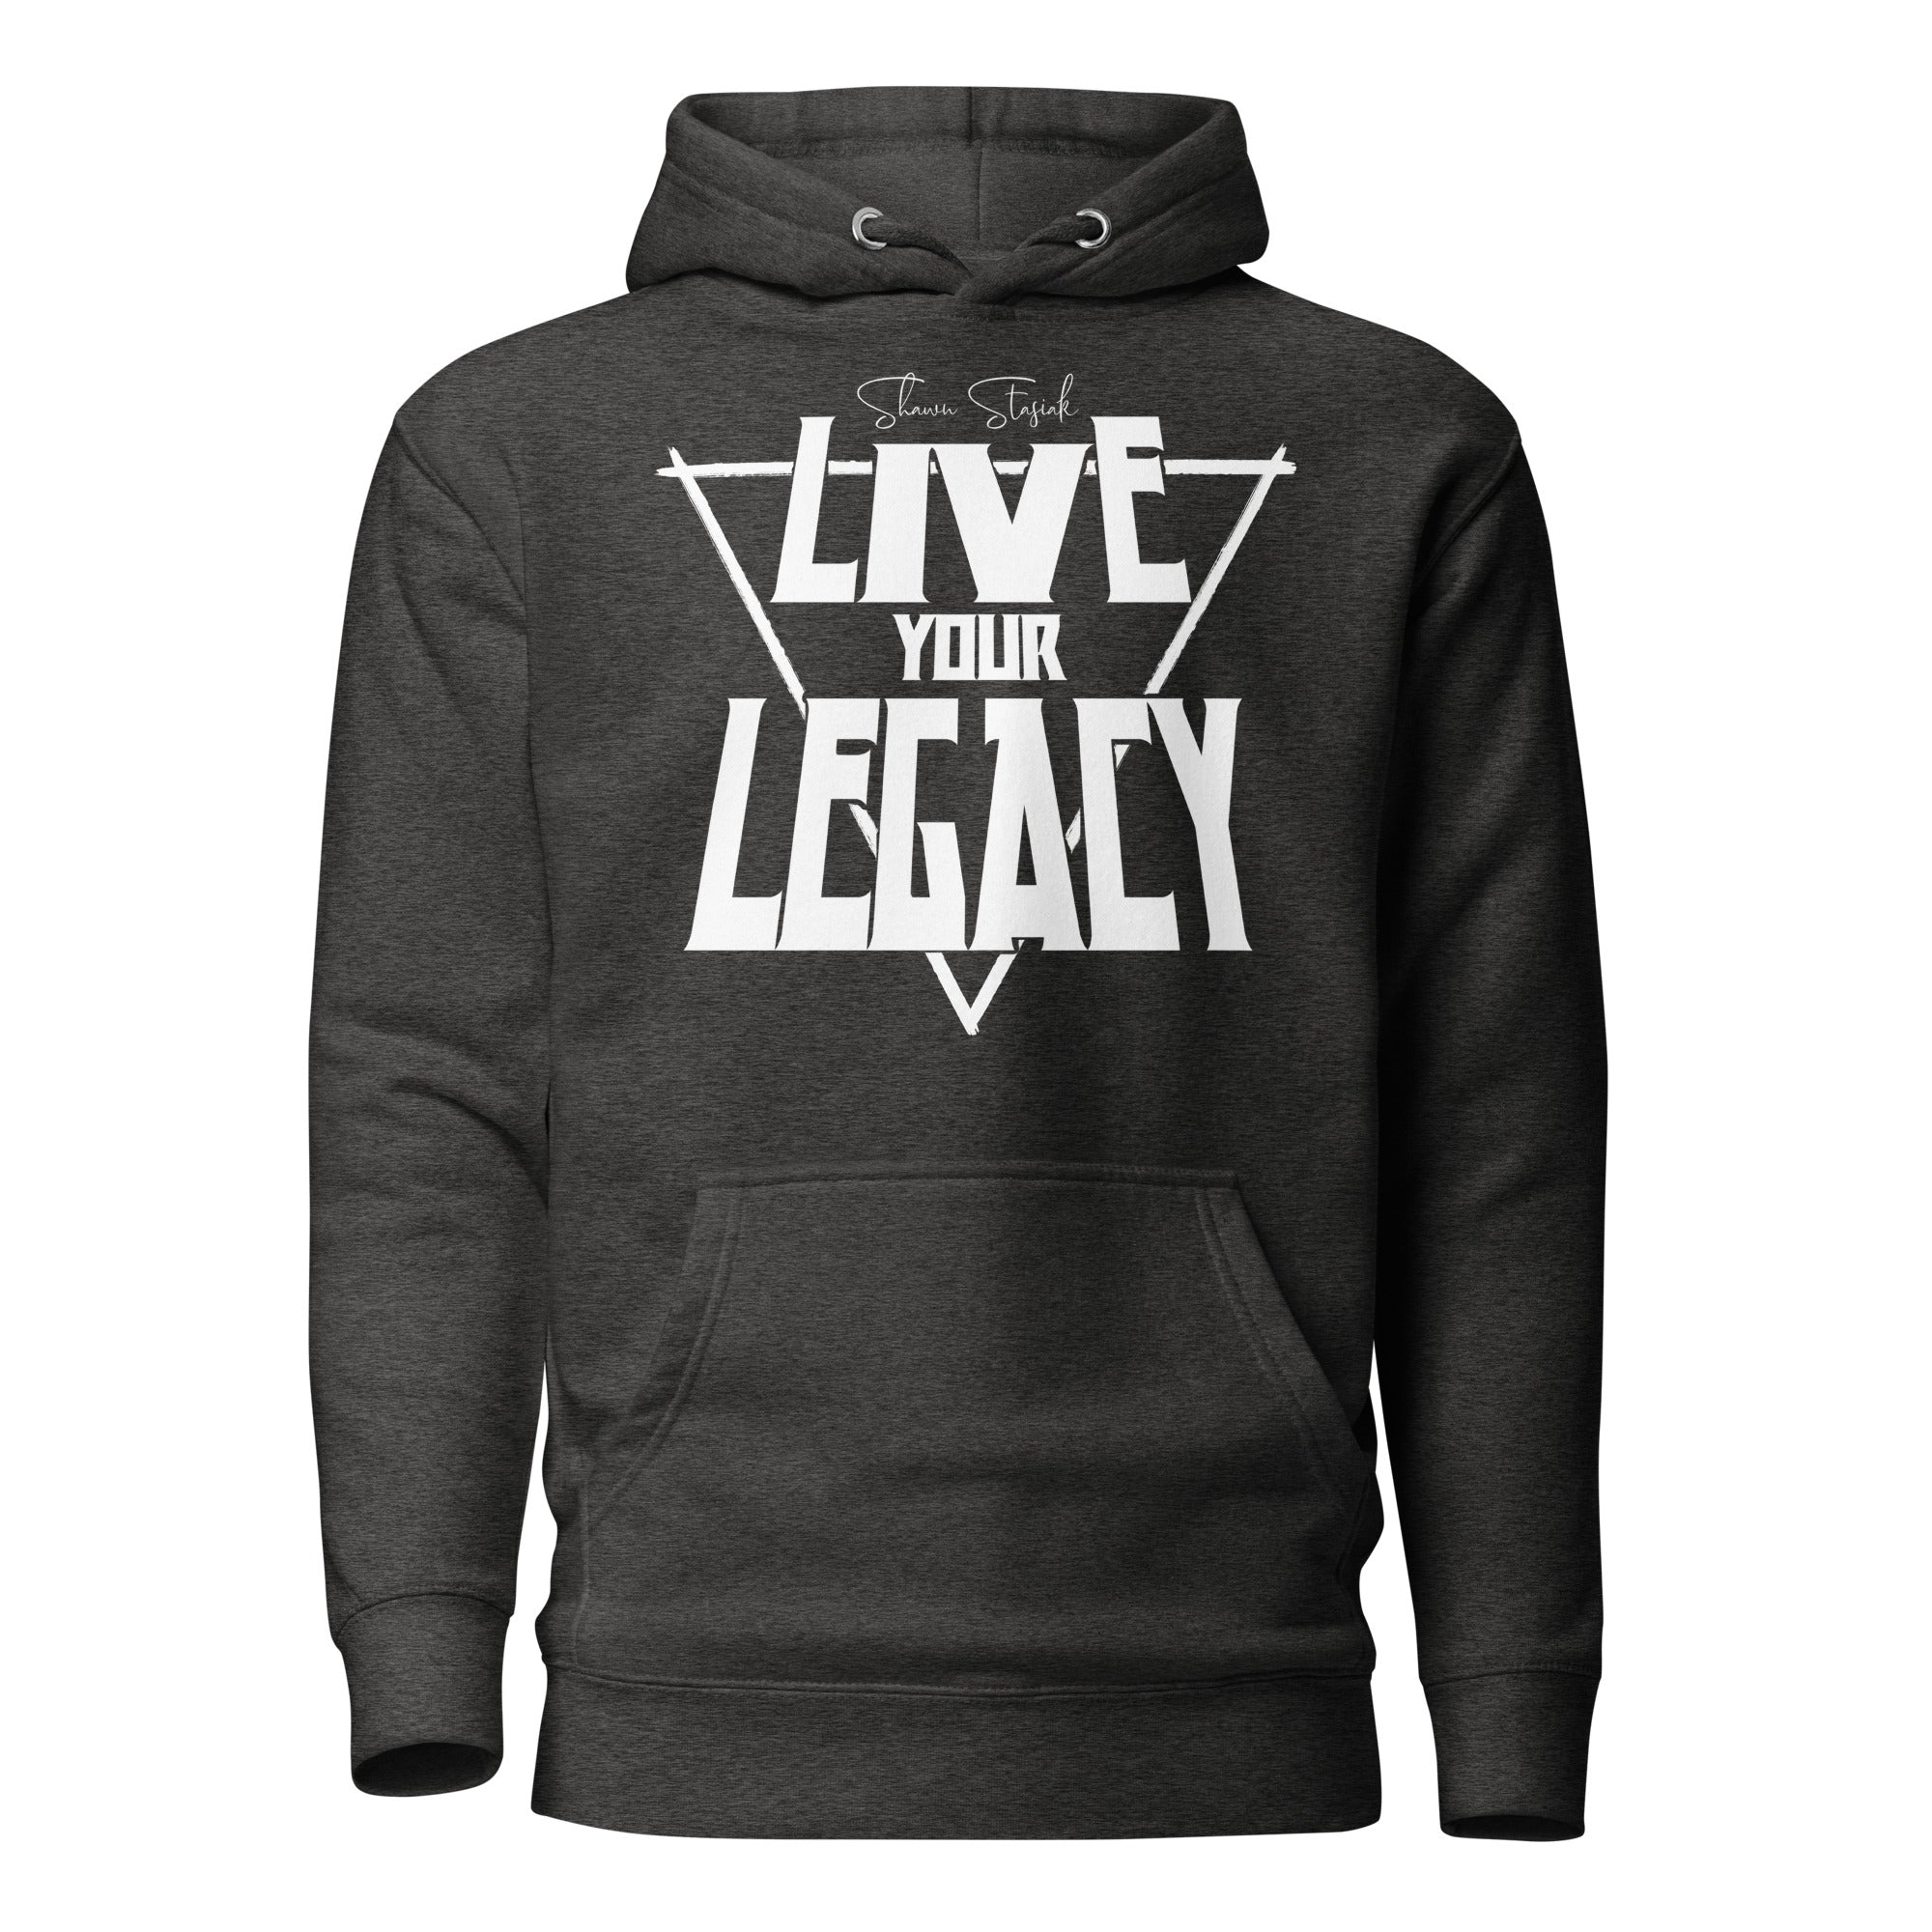 Shawn Stasiak "Live Your Legacy" Unisex Hoodie